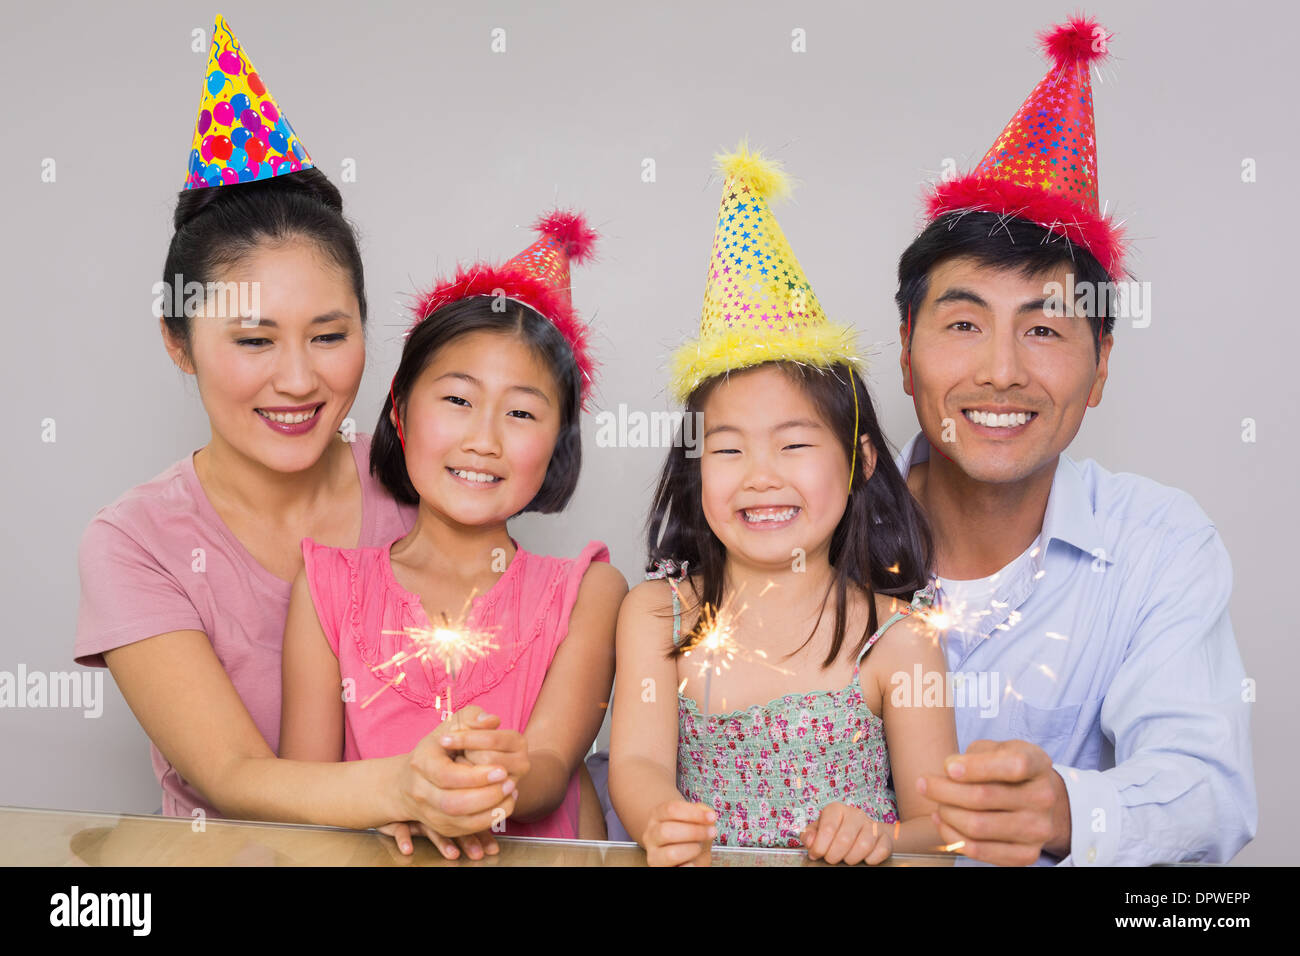 Family of four playing with firecrackers at a birthday party Stock Photo